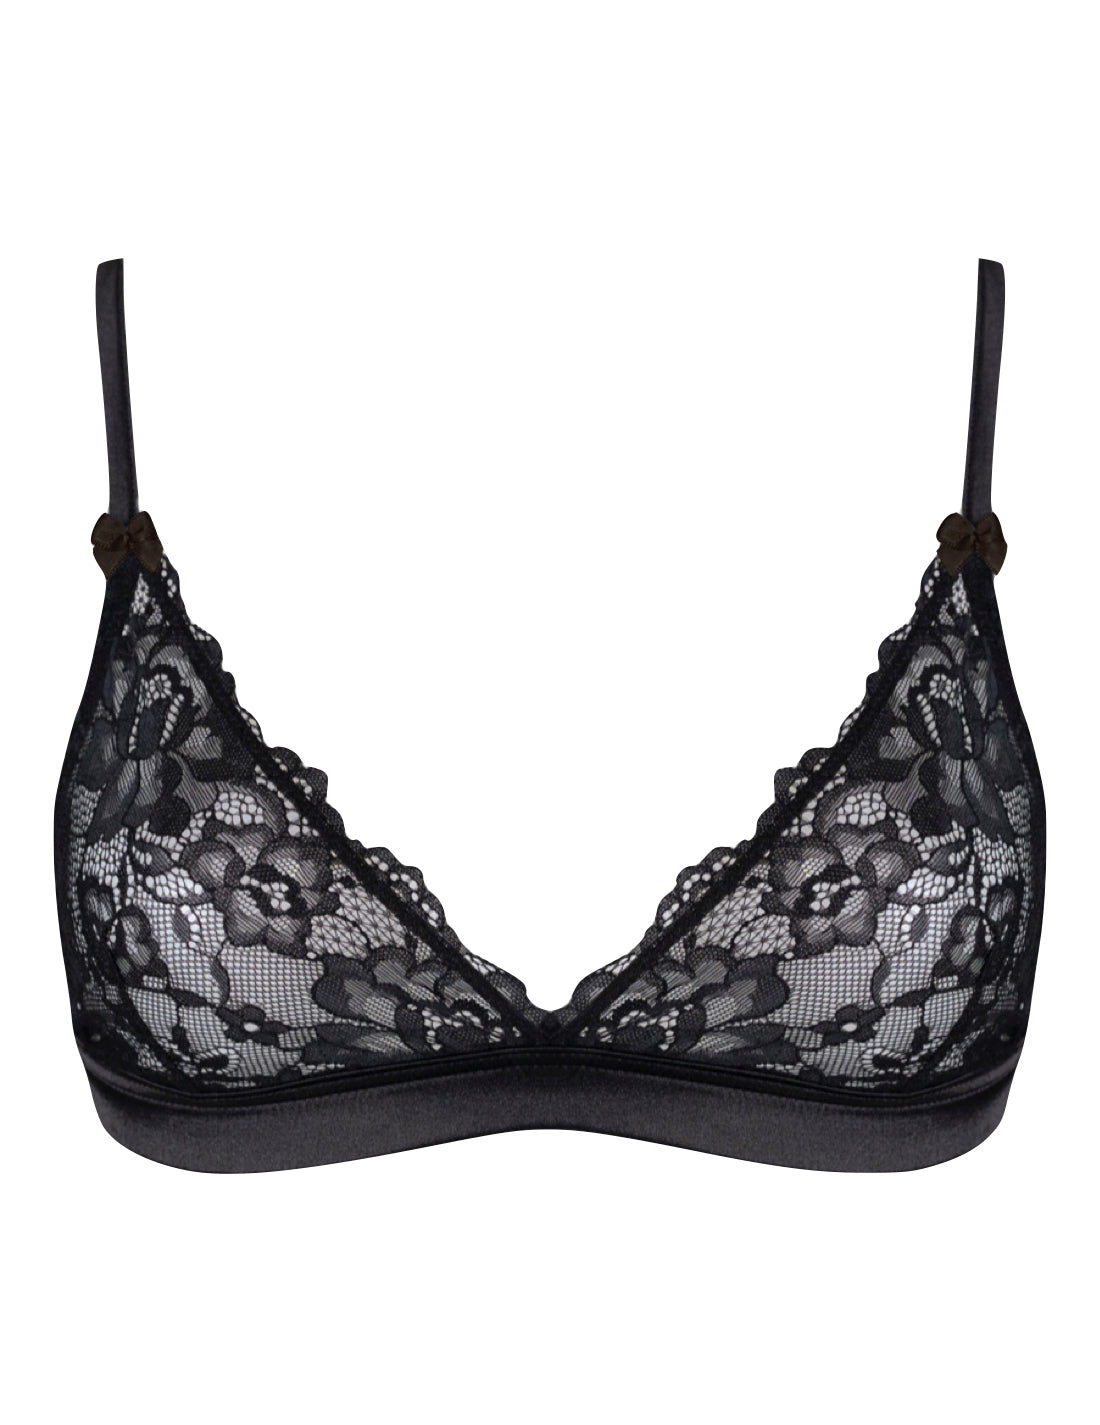 Mimi Holliday Tilt-a-Whirl Maxi Bra Review: 32FF - Big Cup Little Cup